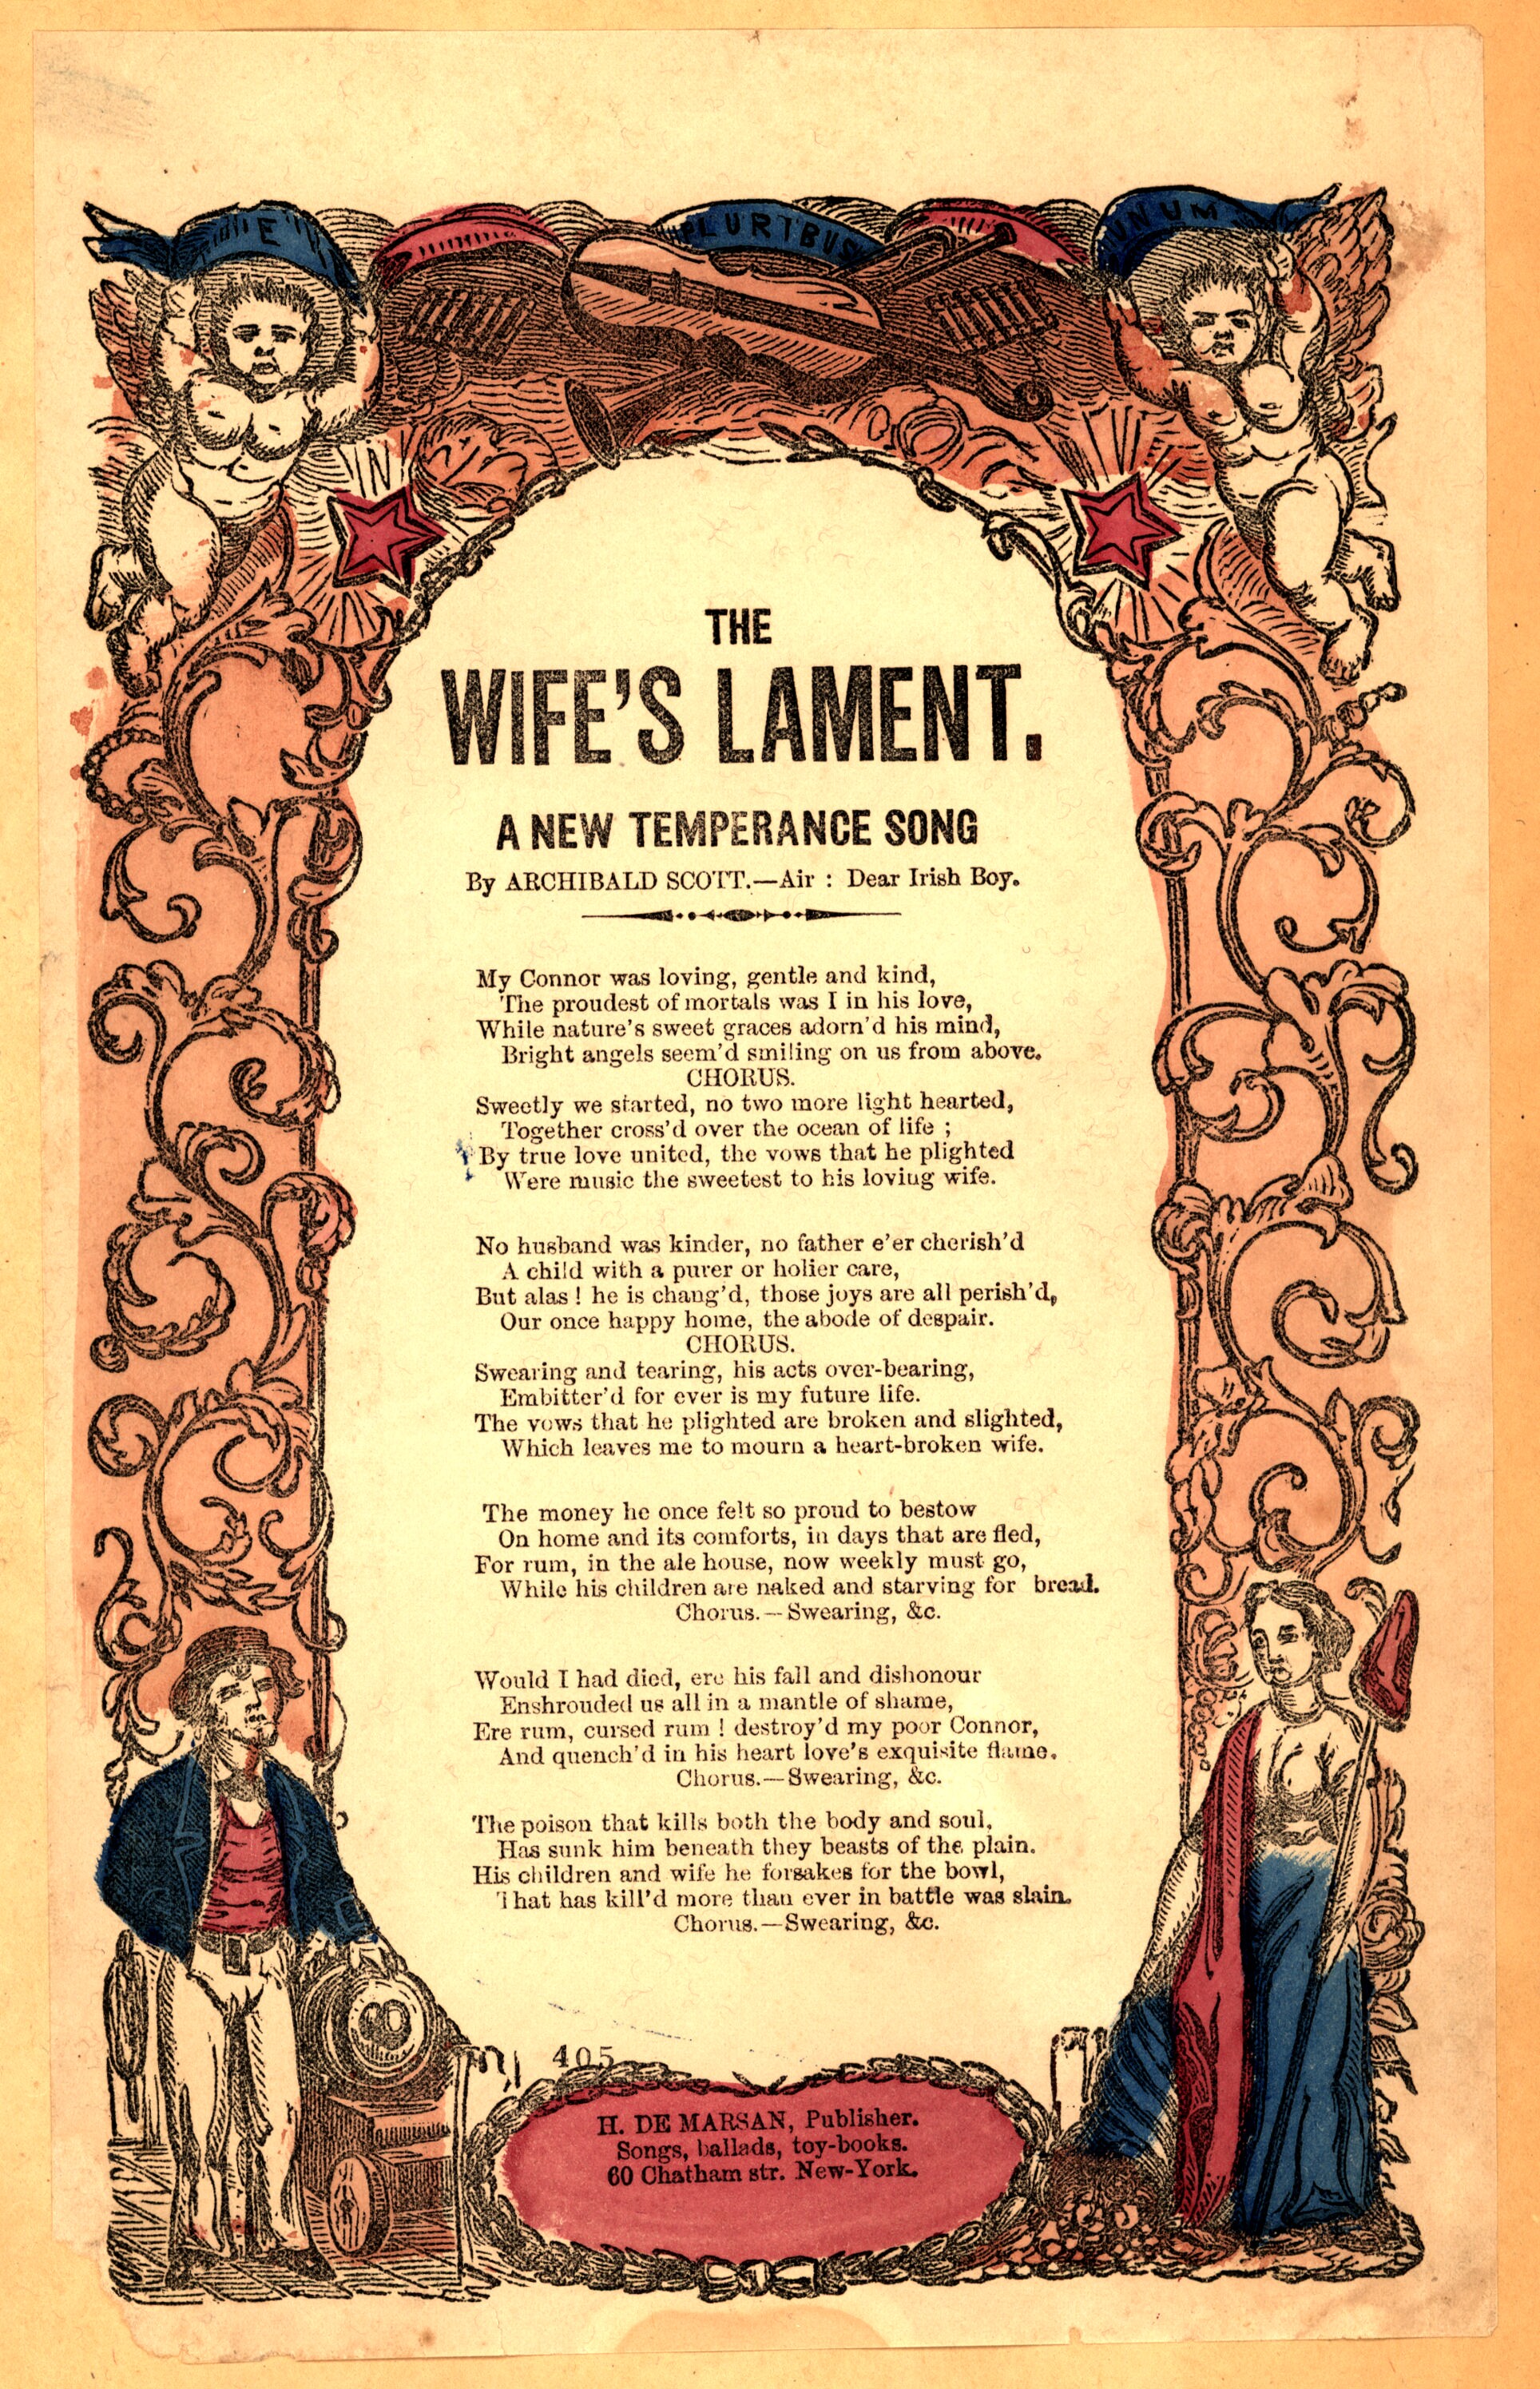 The wife's lament, a new temperance song, by Archibald Scott. Air ...